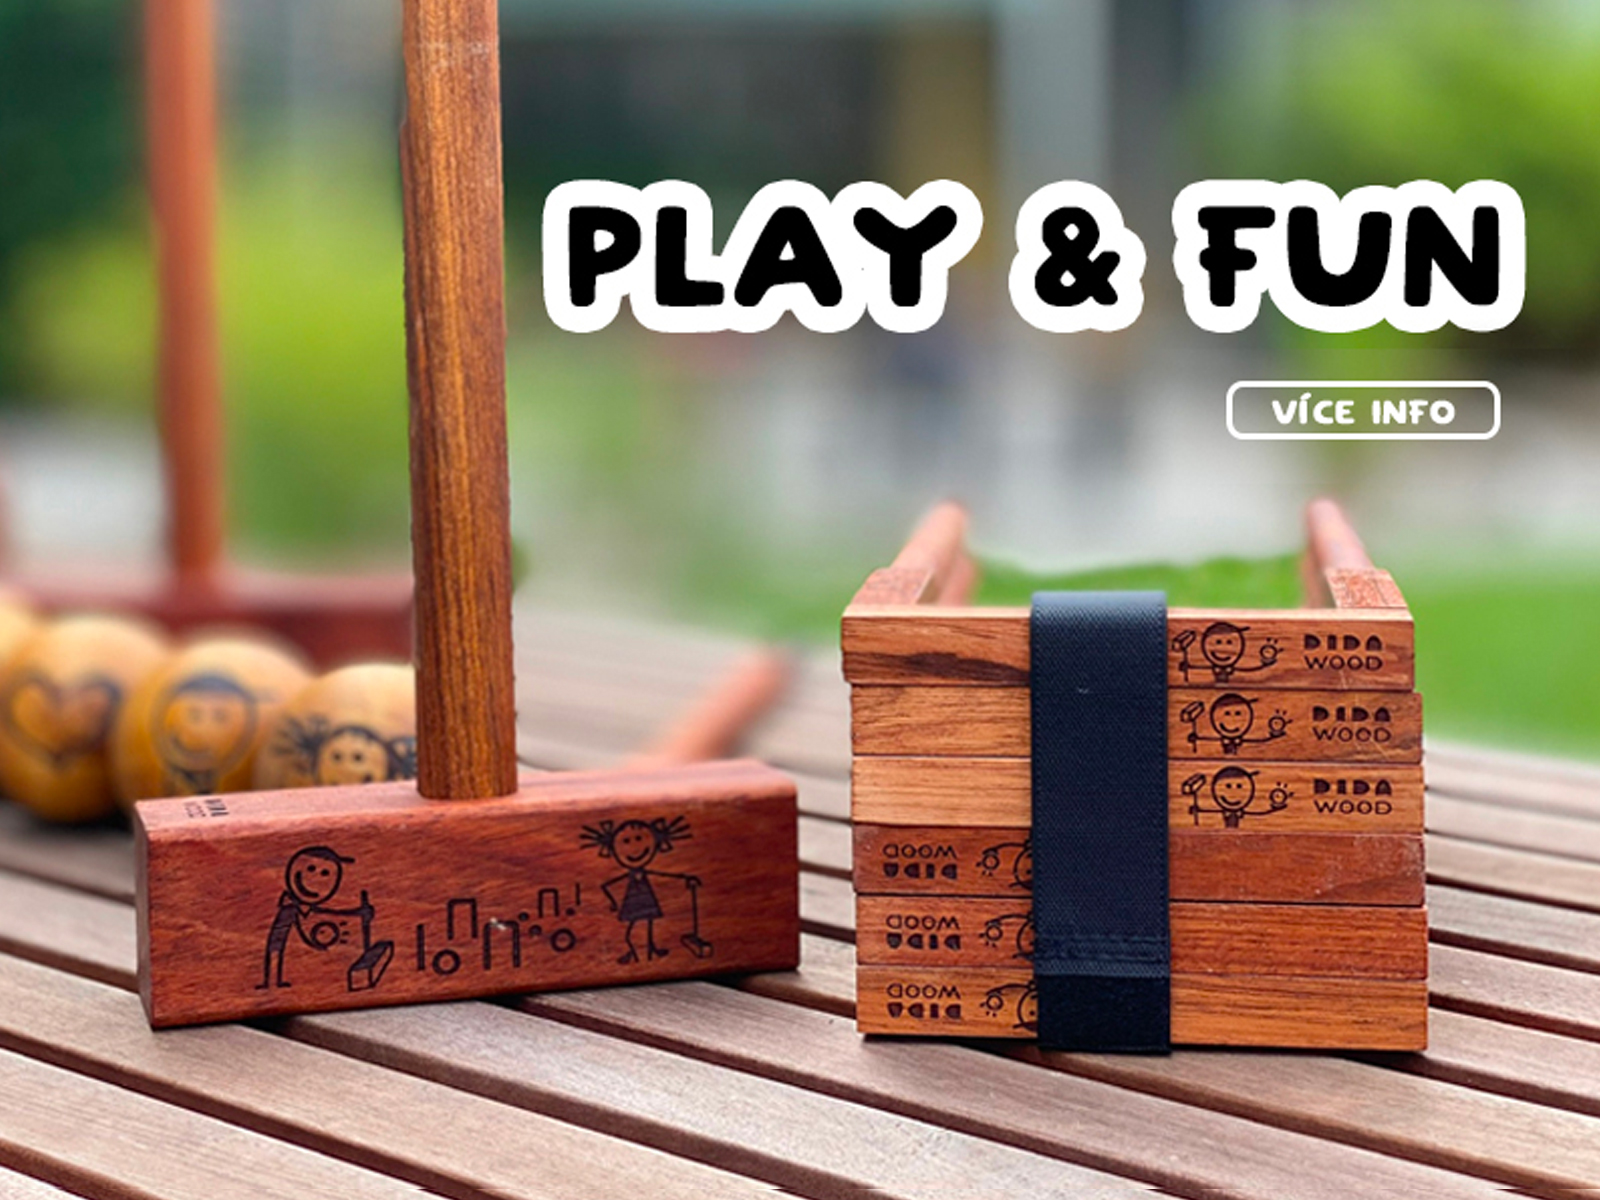 Board games UAX! - With UAX in the garden